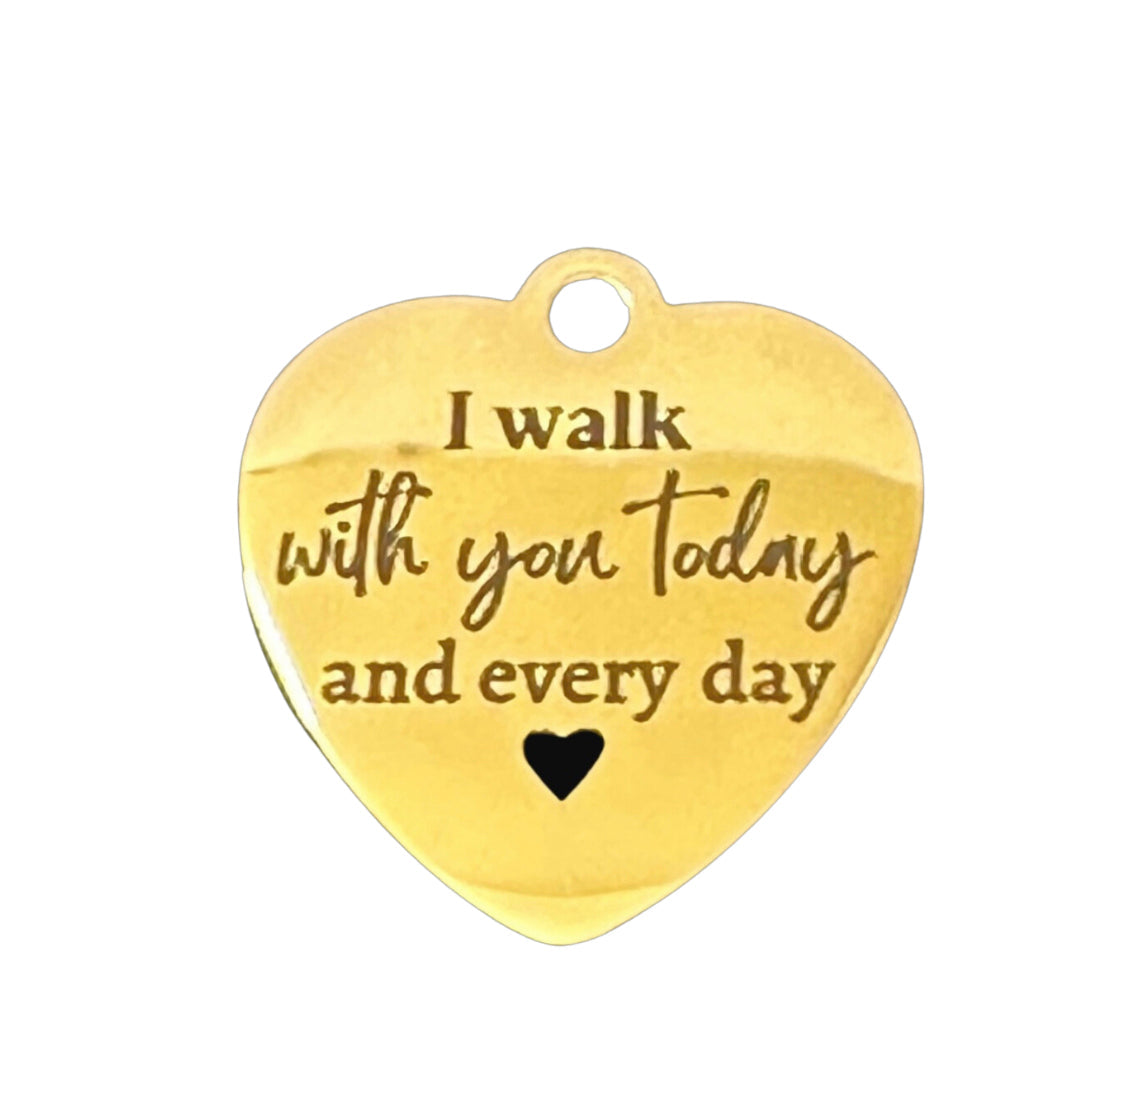 I walk with you today